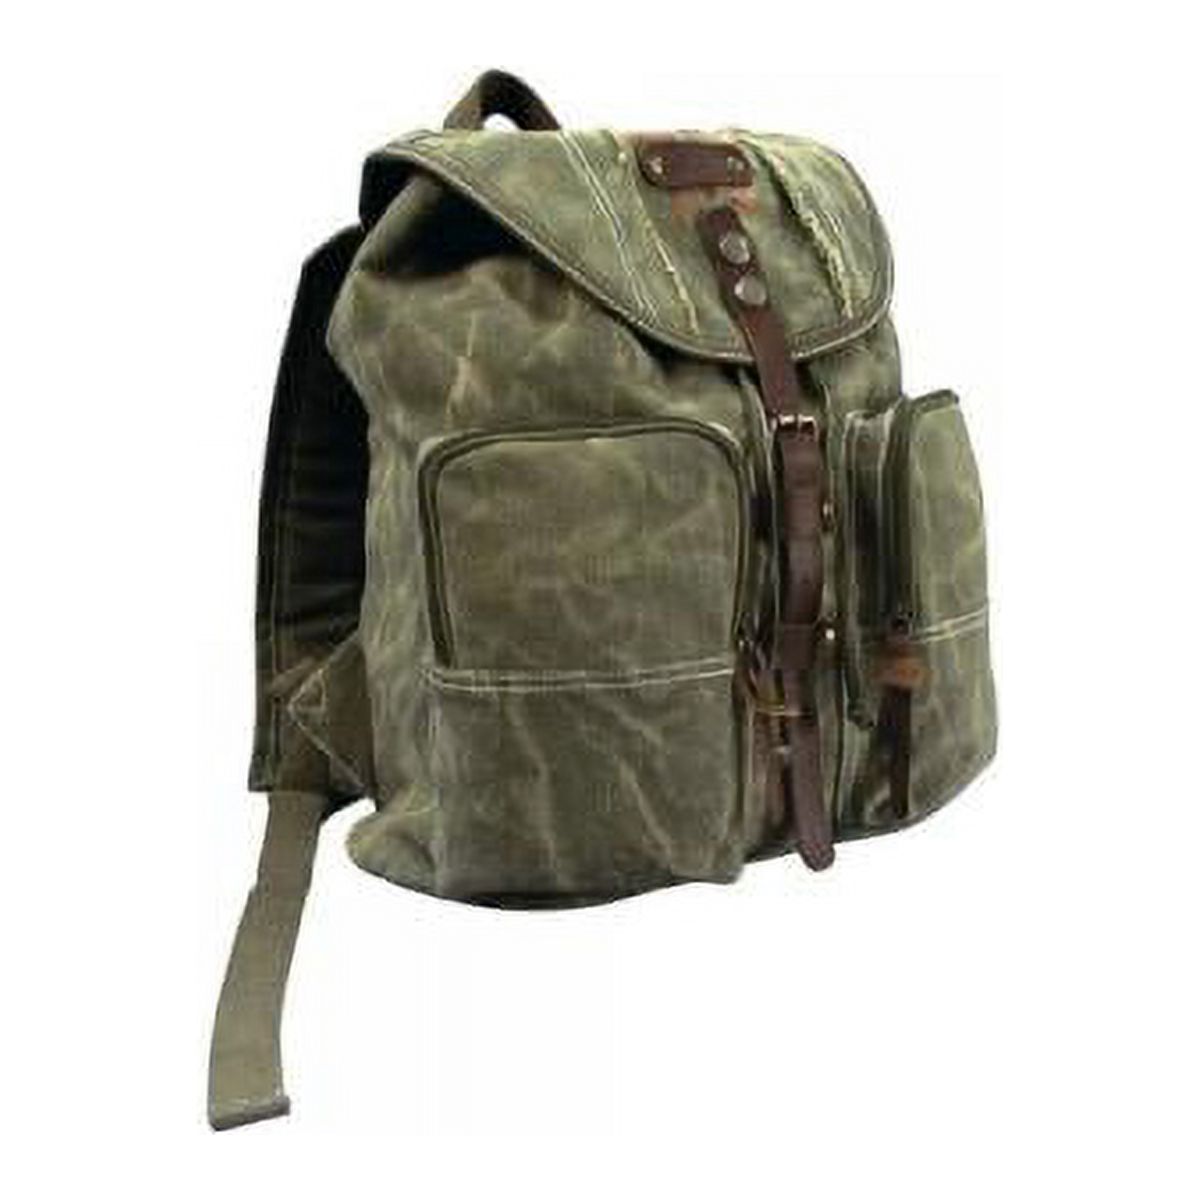 Olive Drab Stonewashed Heavyweight Army Backpack with Leather Accents - image 1 of 2